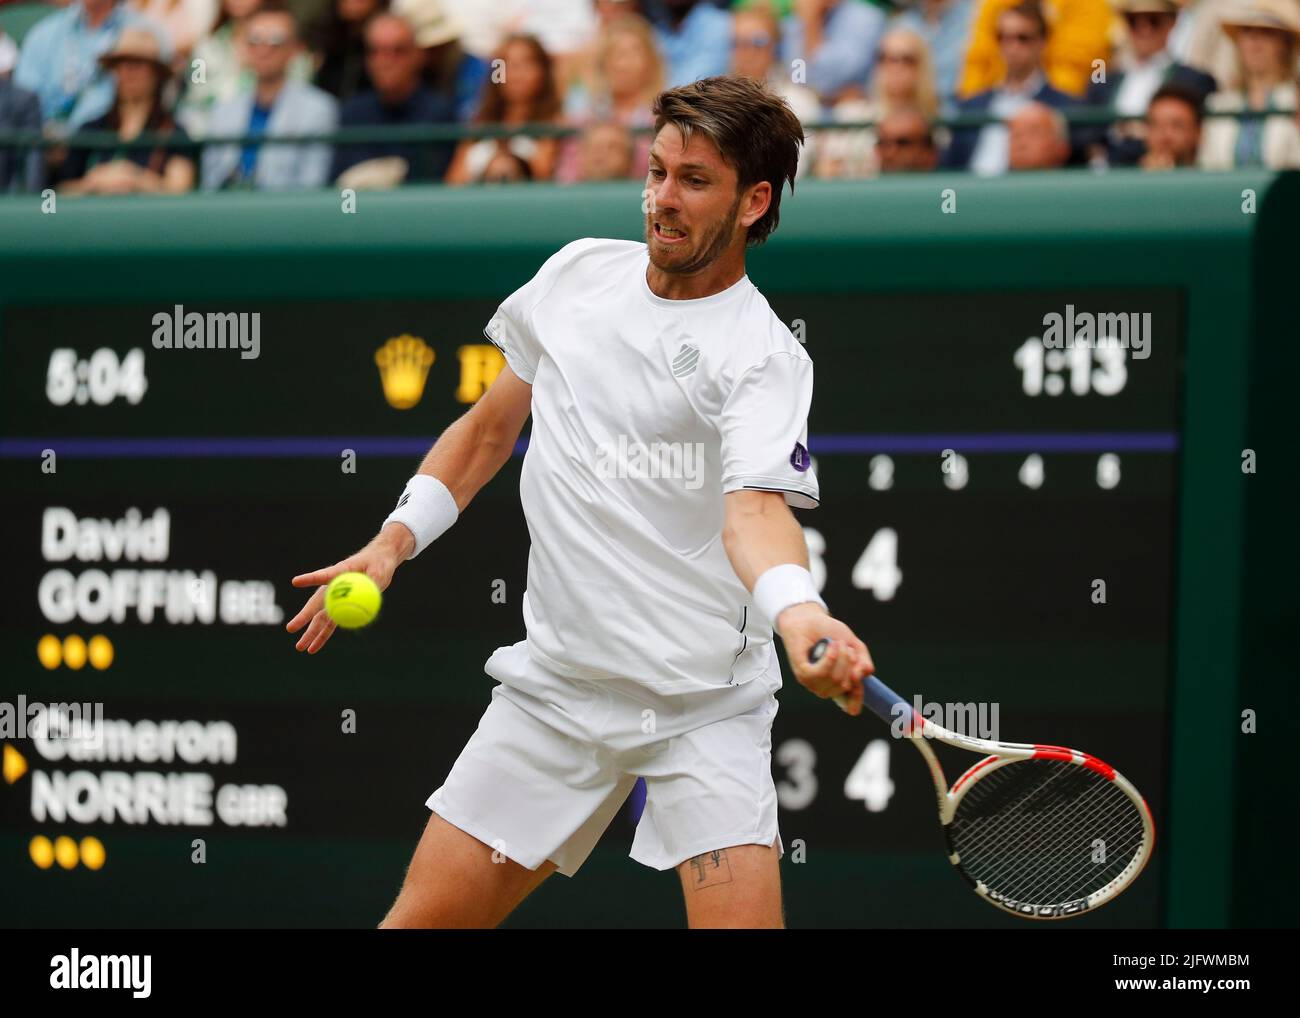 5th July 2022, All England Lawn Tennis and Croquet Club, London, England; Wimbledon Tennis tournament; Cameron Norrie (GBR) plays a forehand to David Goffin (BEL) Credit Action Plus Sports Images/Alamy Live News